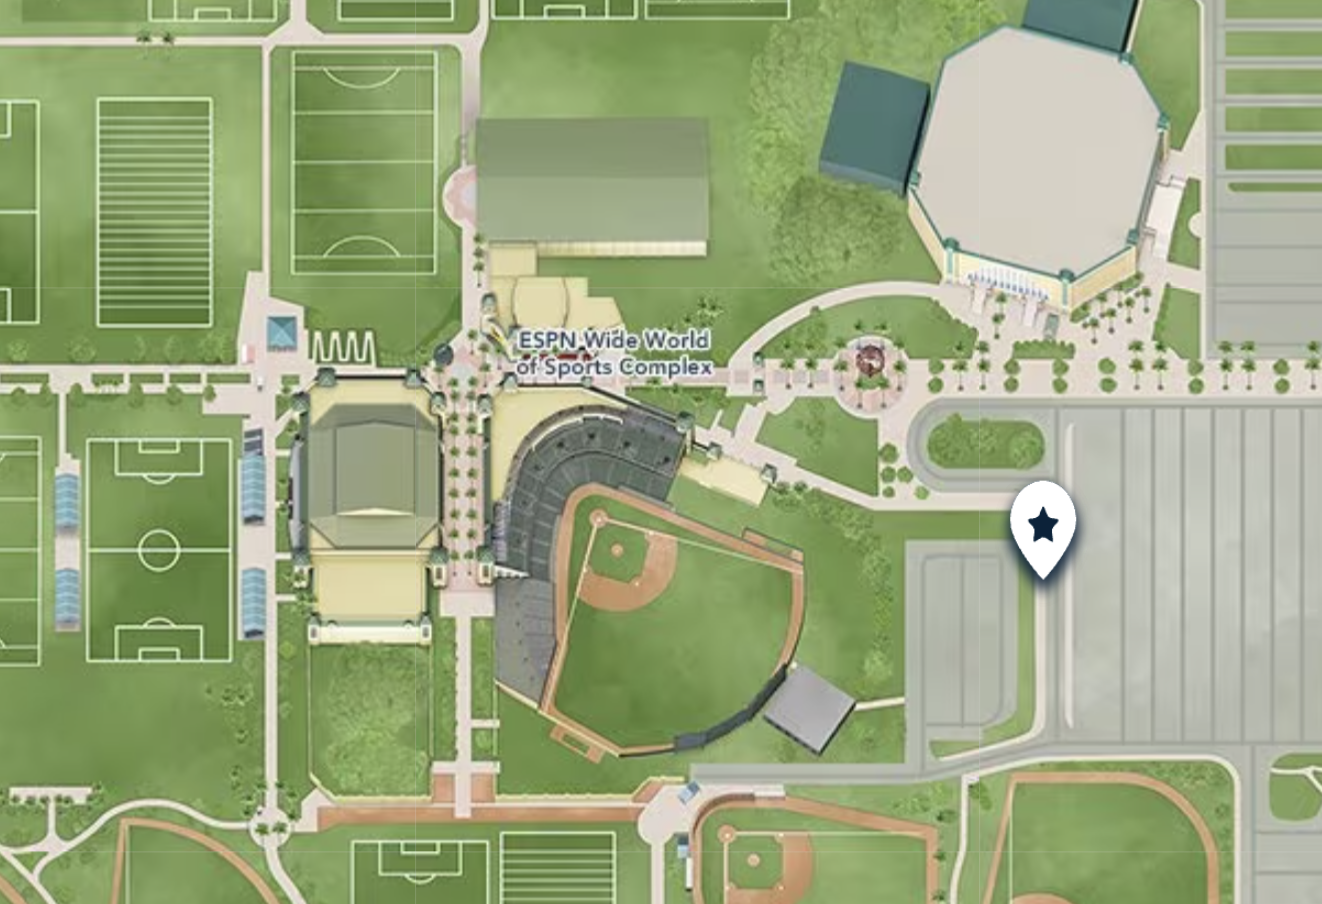 ESPN Wide World of Sports Complex Bus Stop Map